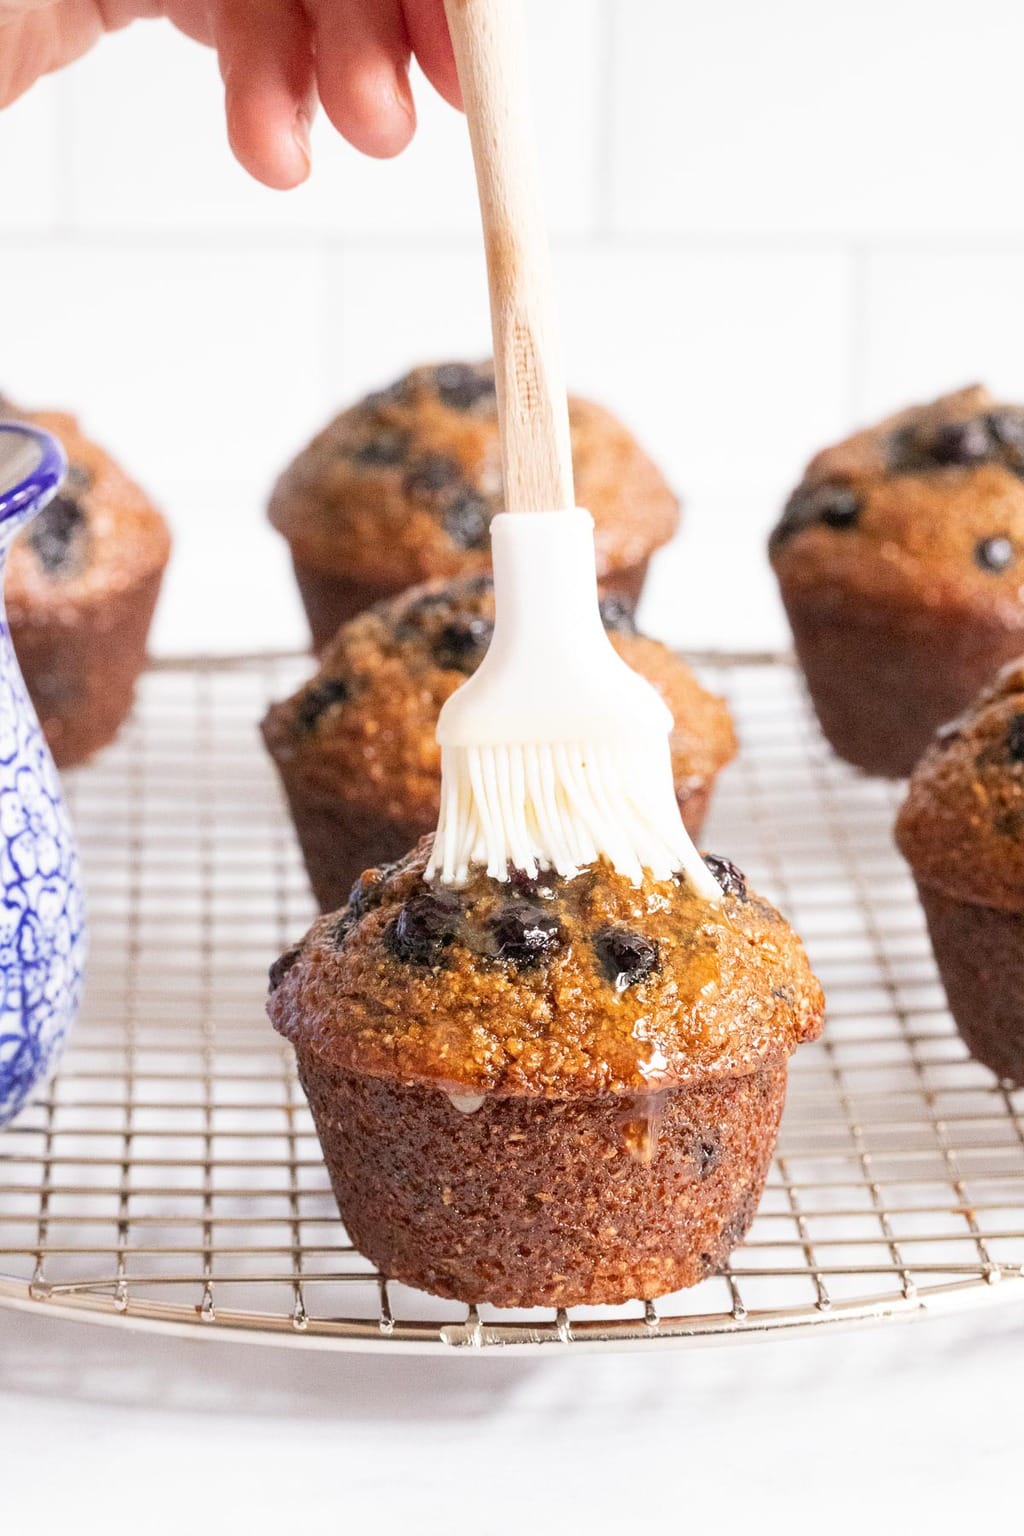 Vertical photo of a Honey-Glazed Blueberry Bran Muffin being brushed with honey glaze.